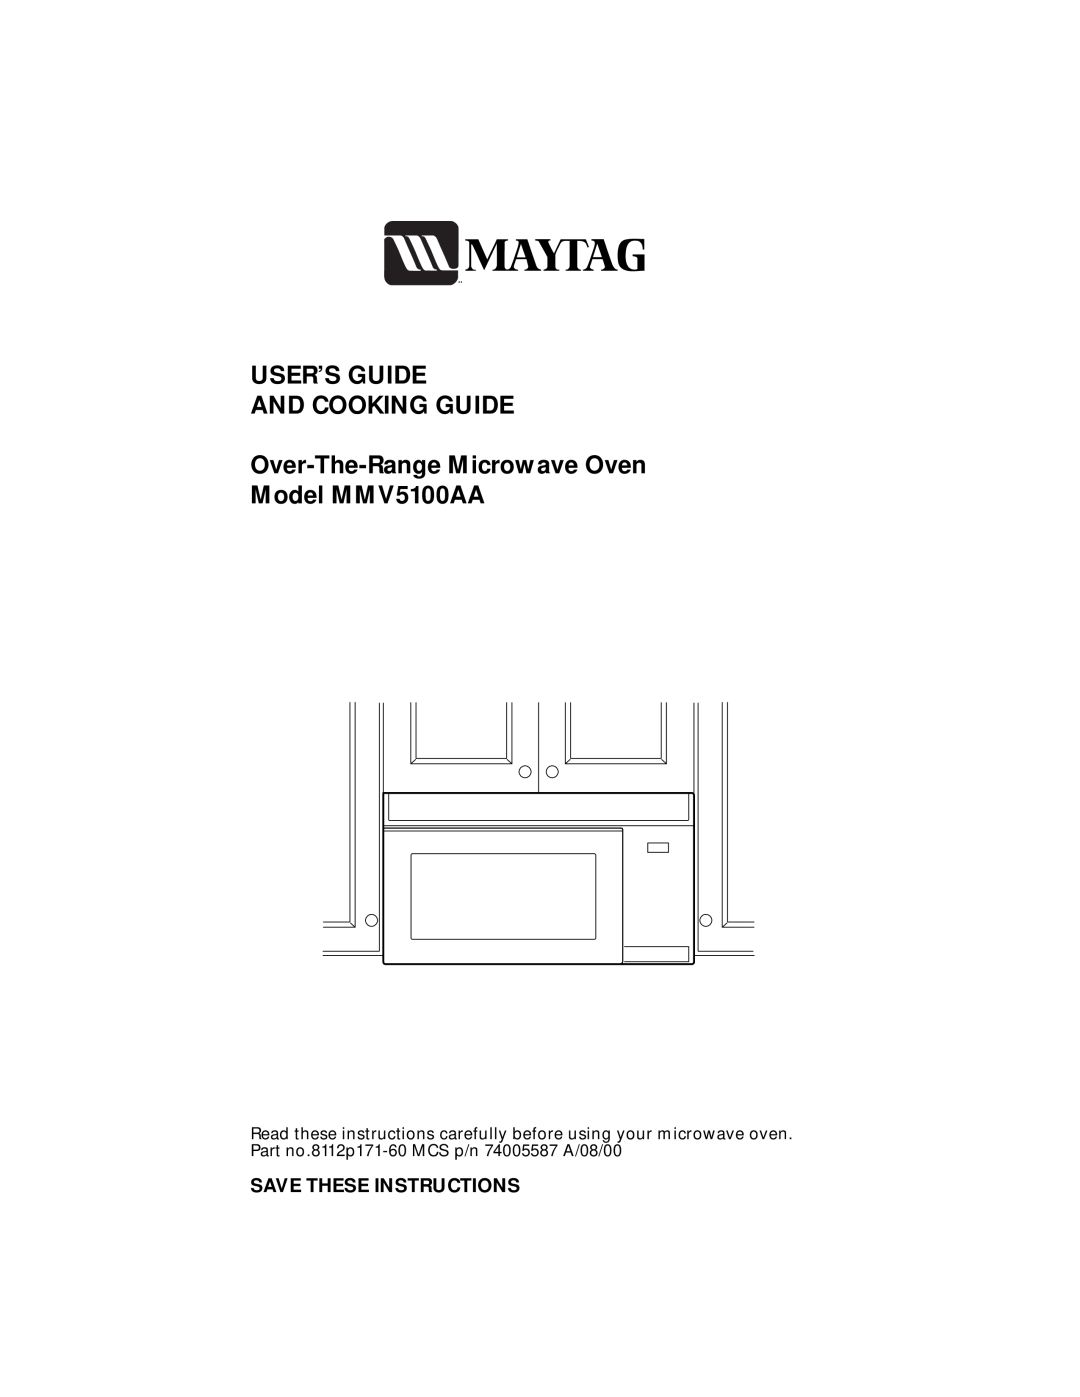 Maytag MMV5100AA manual Save These Instructions, MAYrAI3, Usersguide And Cooking Guide 